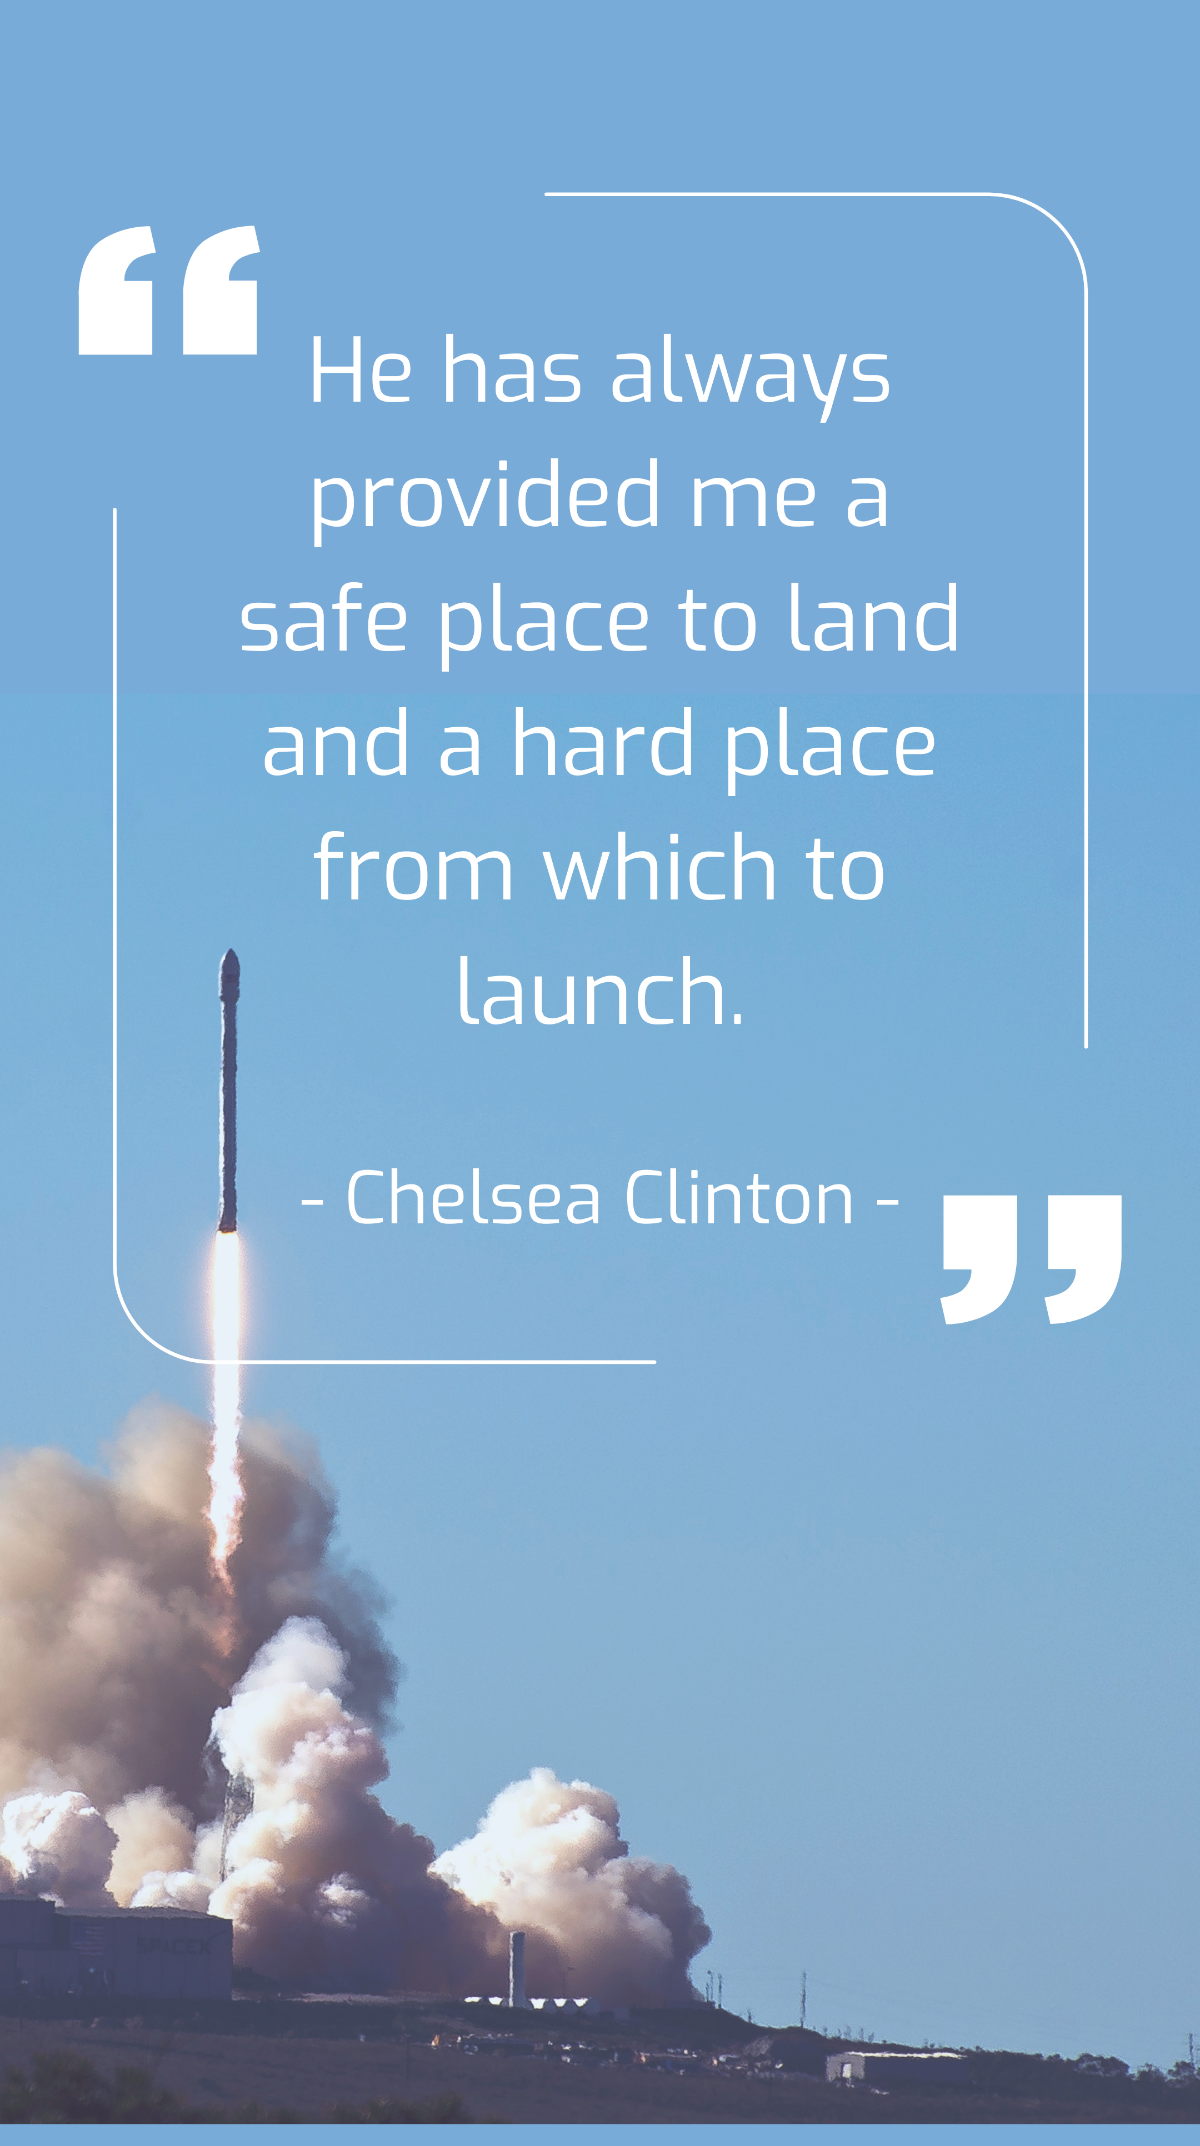 Chelsea Clinton - He has always provided me a safe place to land and a hard place from which to launch. Template